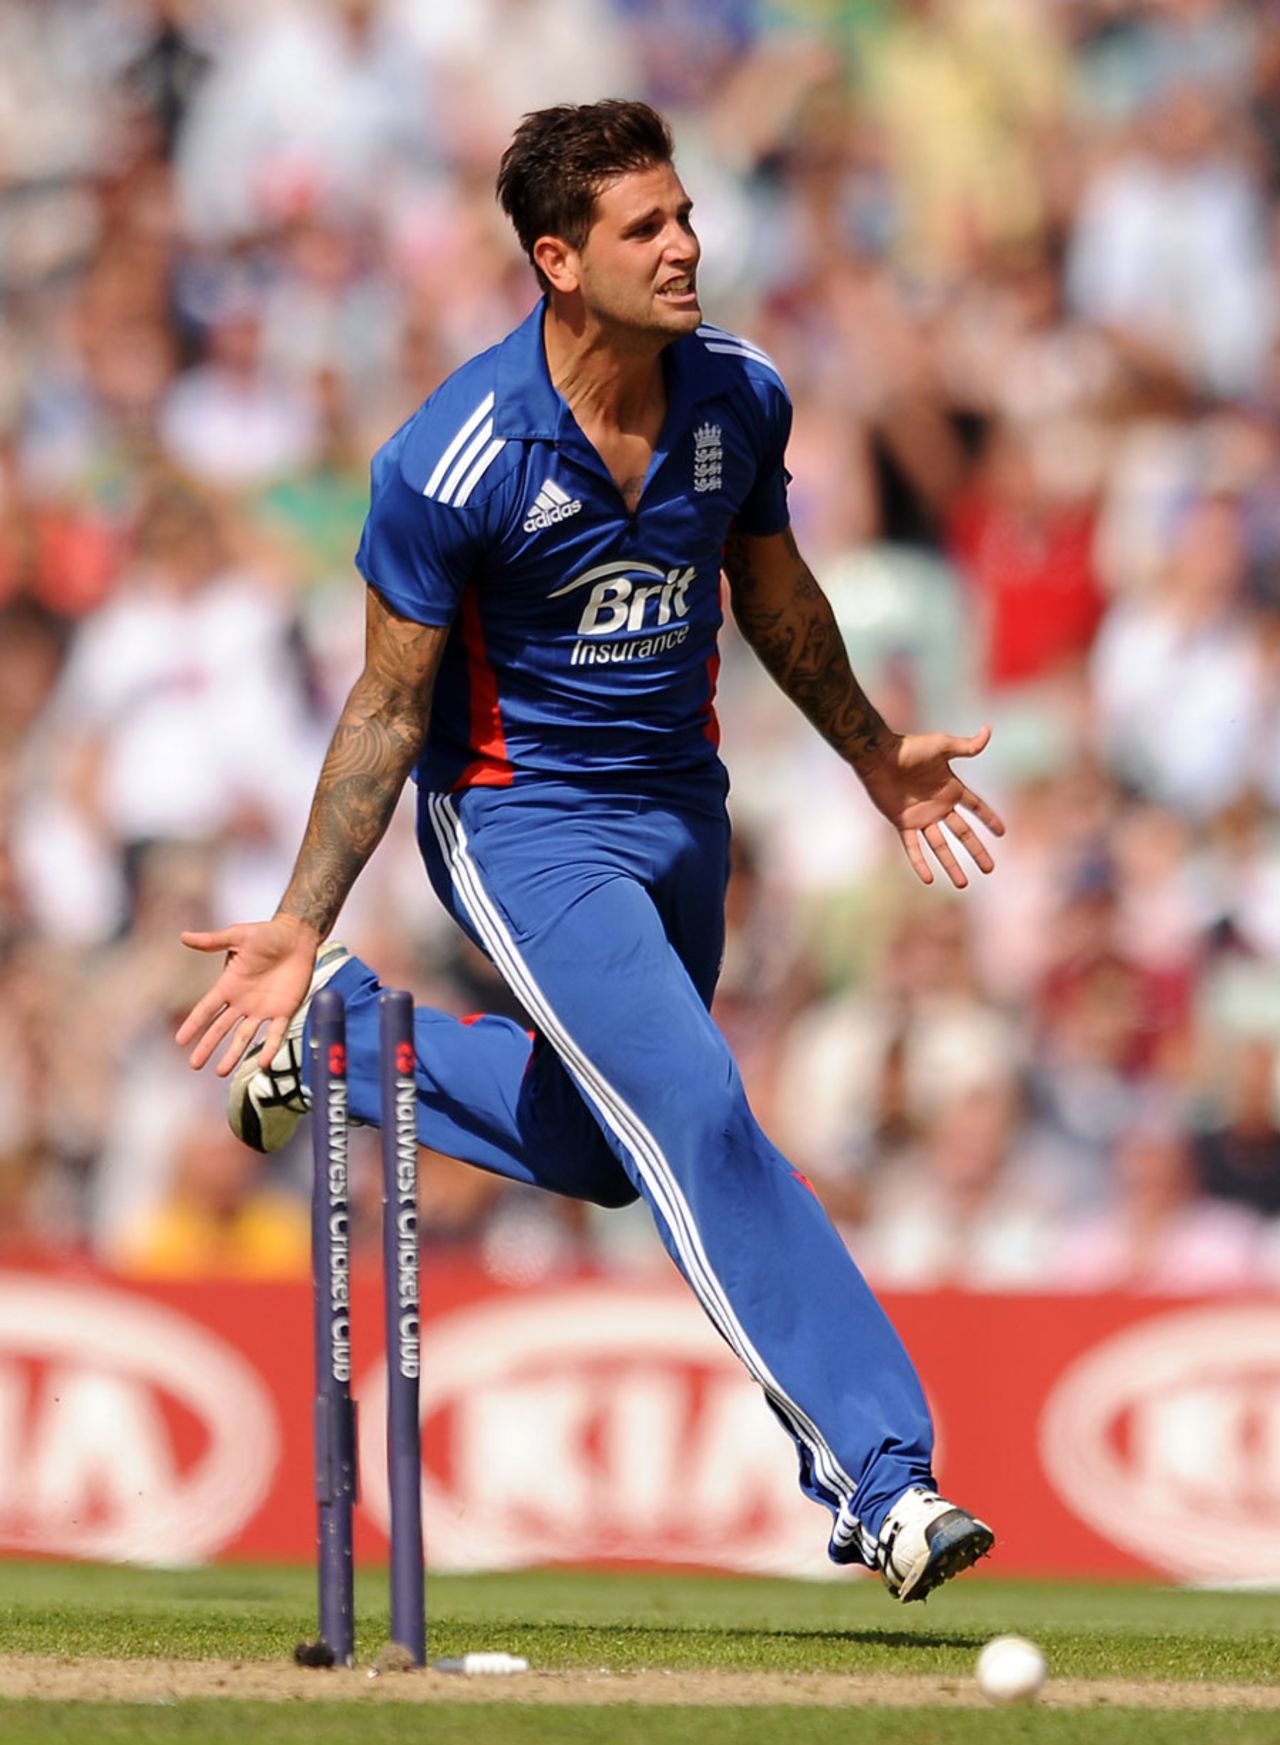 Jade Dernbach celebrates enthusiastically after bowling Hashim Amla, England v South Africa, 3rd NatWest ODI, The Oval, August 31, 2012